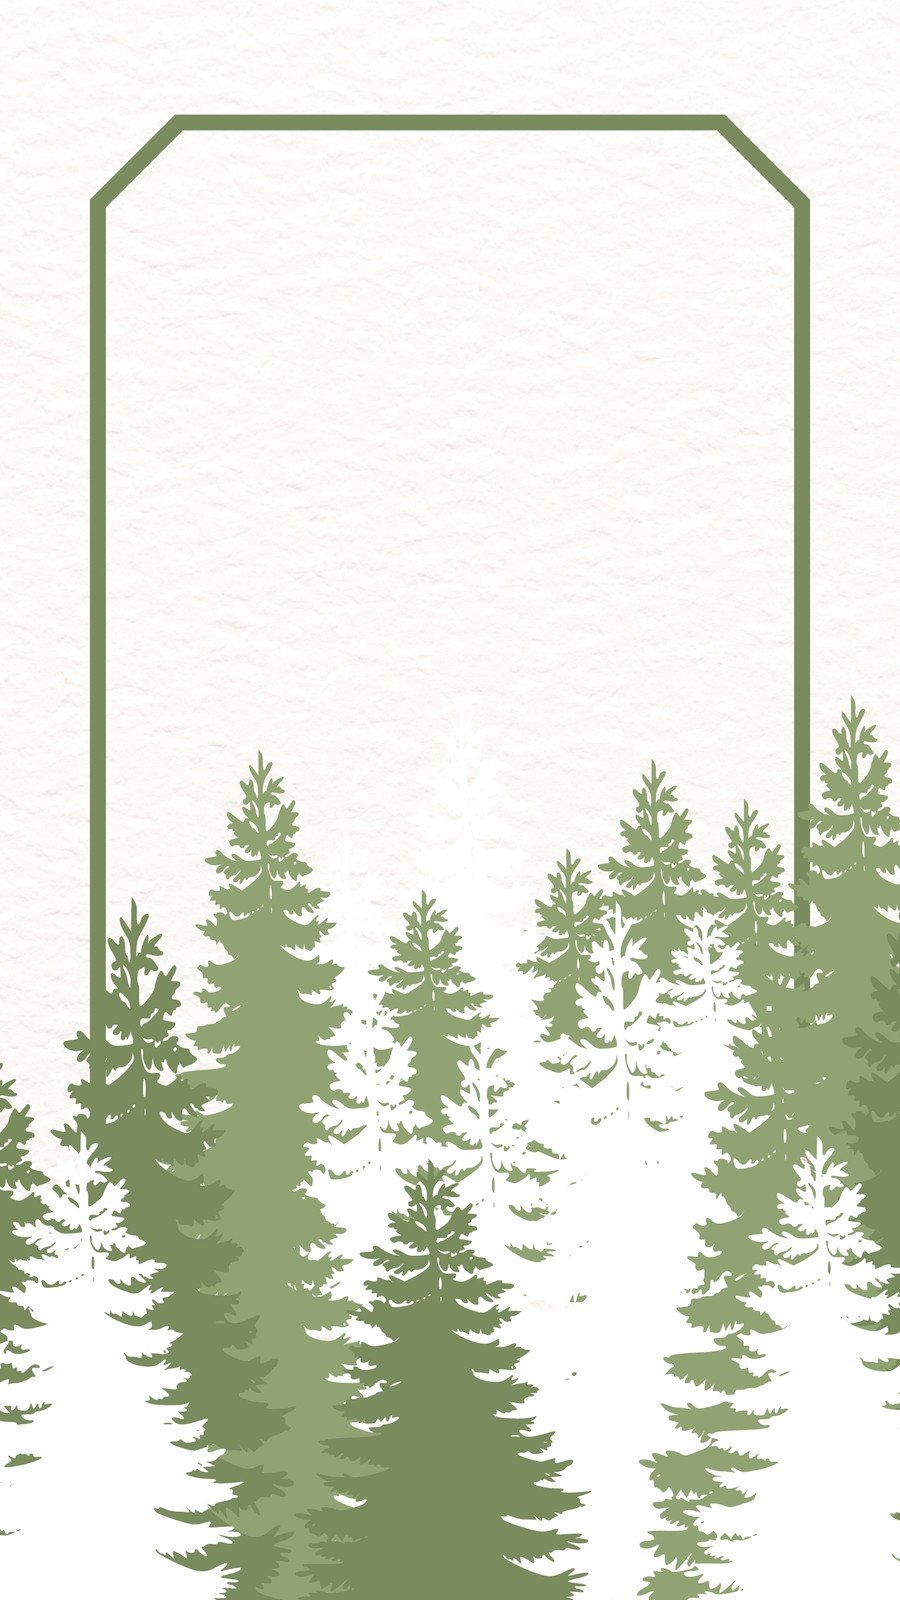 Free and customizable forest templates